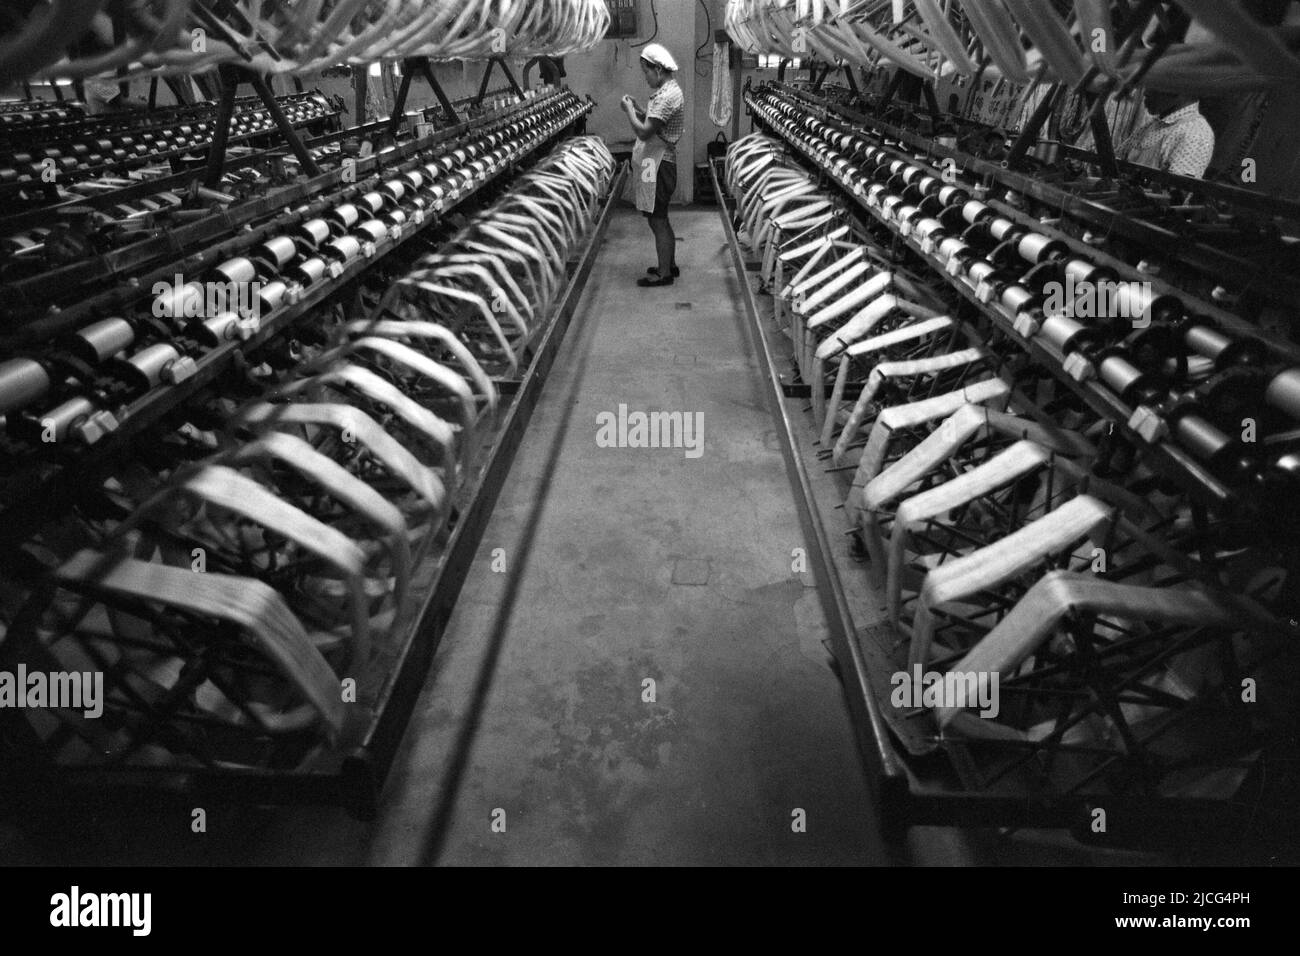 Chinese woman, worker in a textile factory, in the foreground spinning machines, loom, black and white, black and white, black and white, monochrome, SW Monochrome, black and white photo, July 29, 1972 Stock Photo